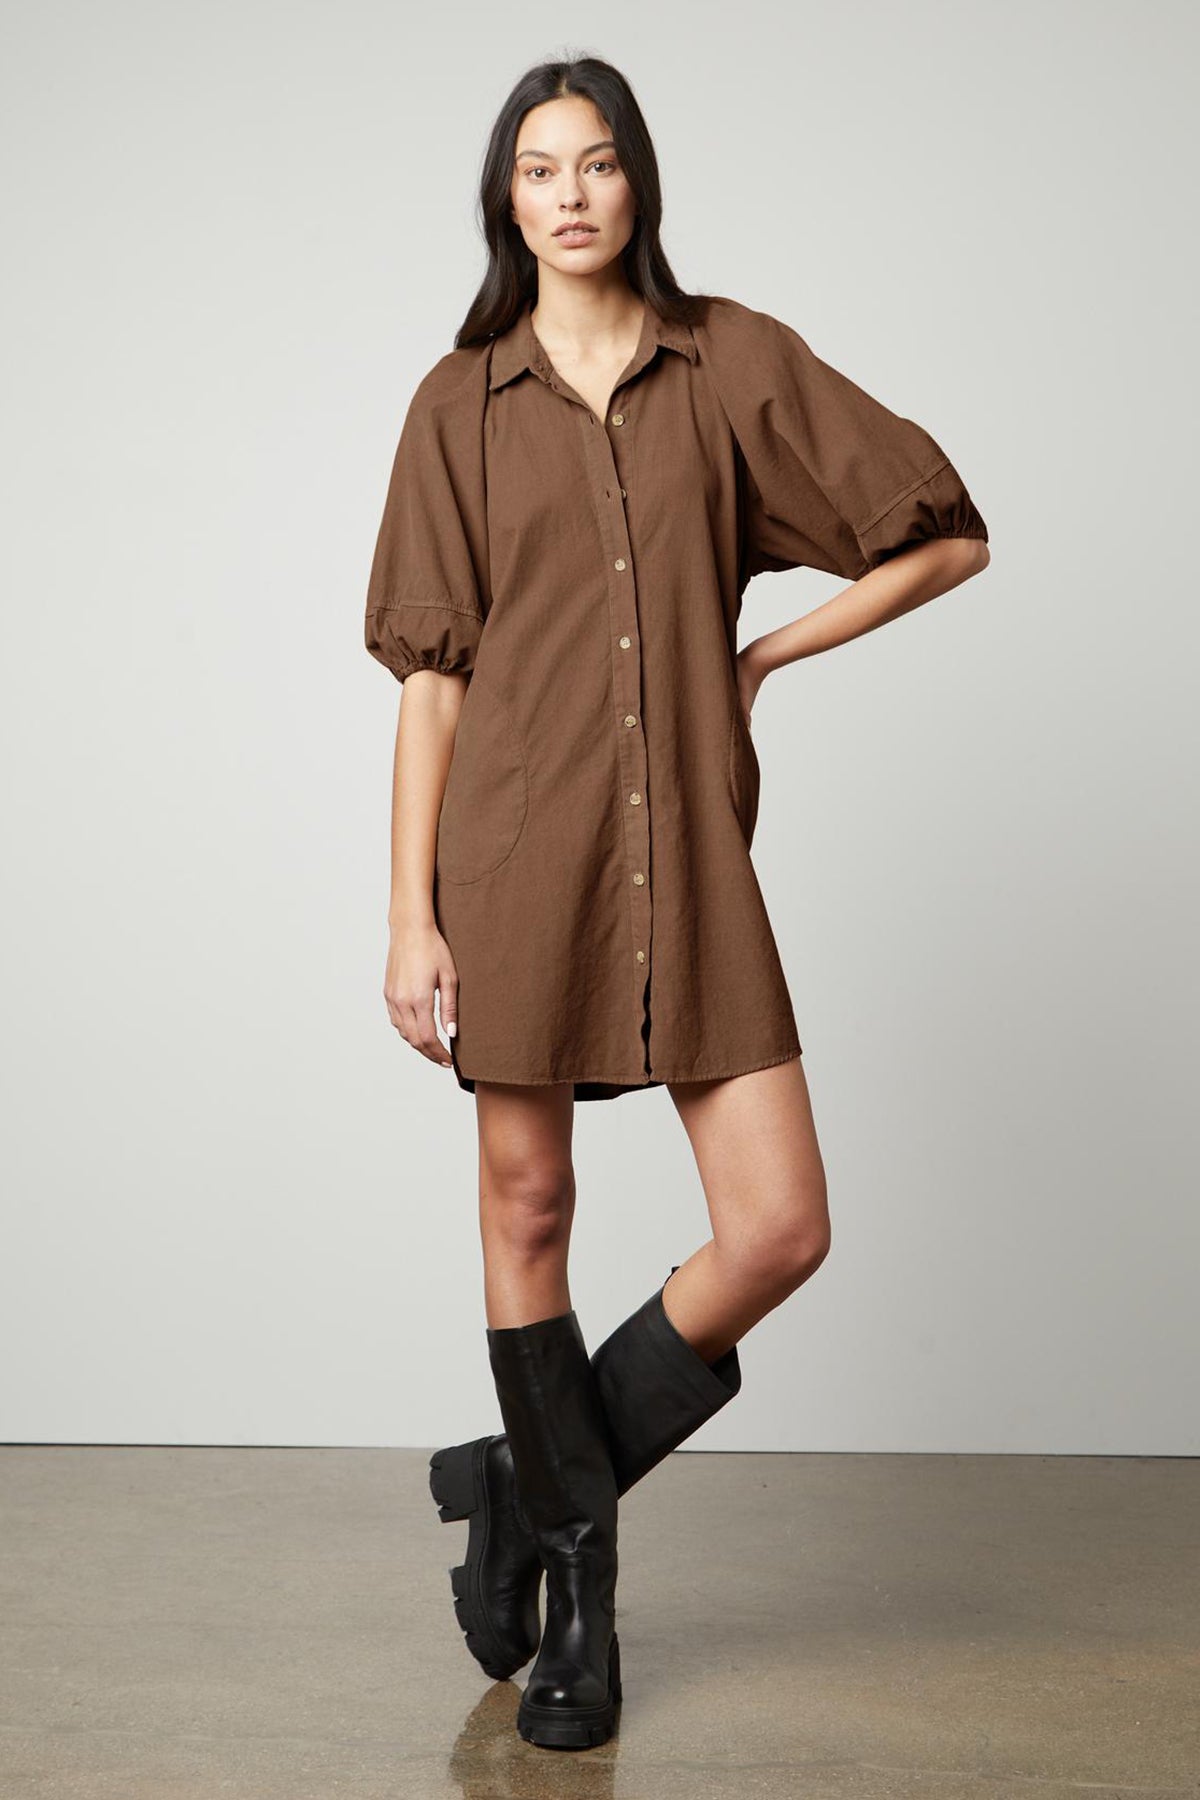   The model is wearing a KADY CORDUROY BUTTON-UP DRESS by Velvet by Graham & Spencer and black boots. 